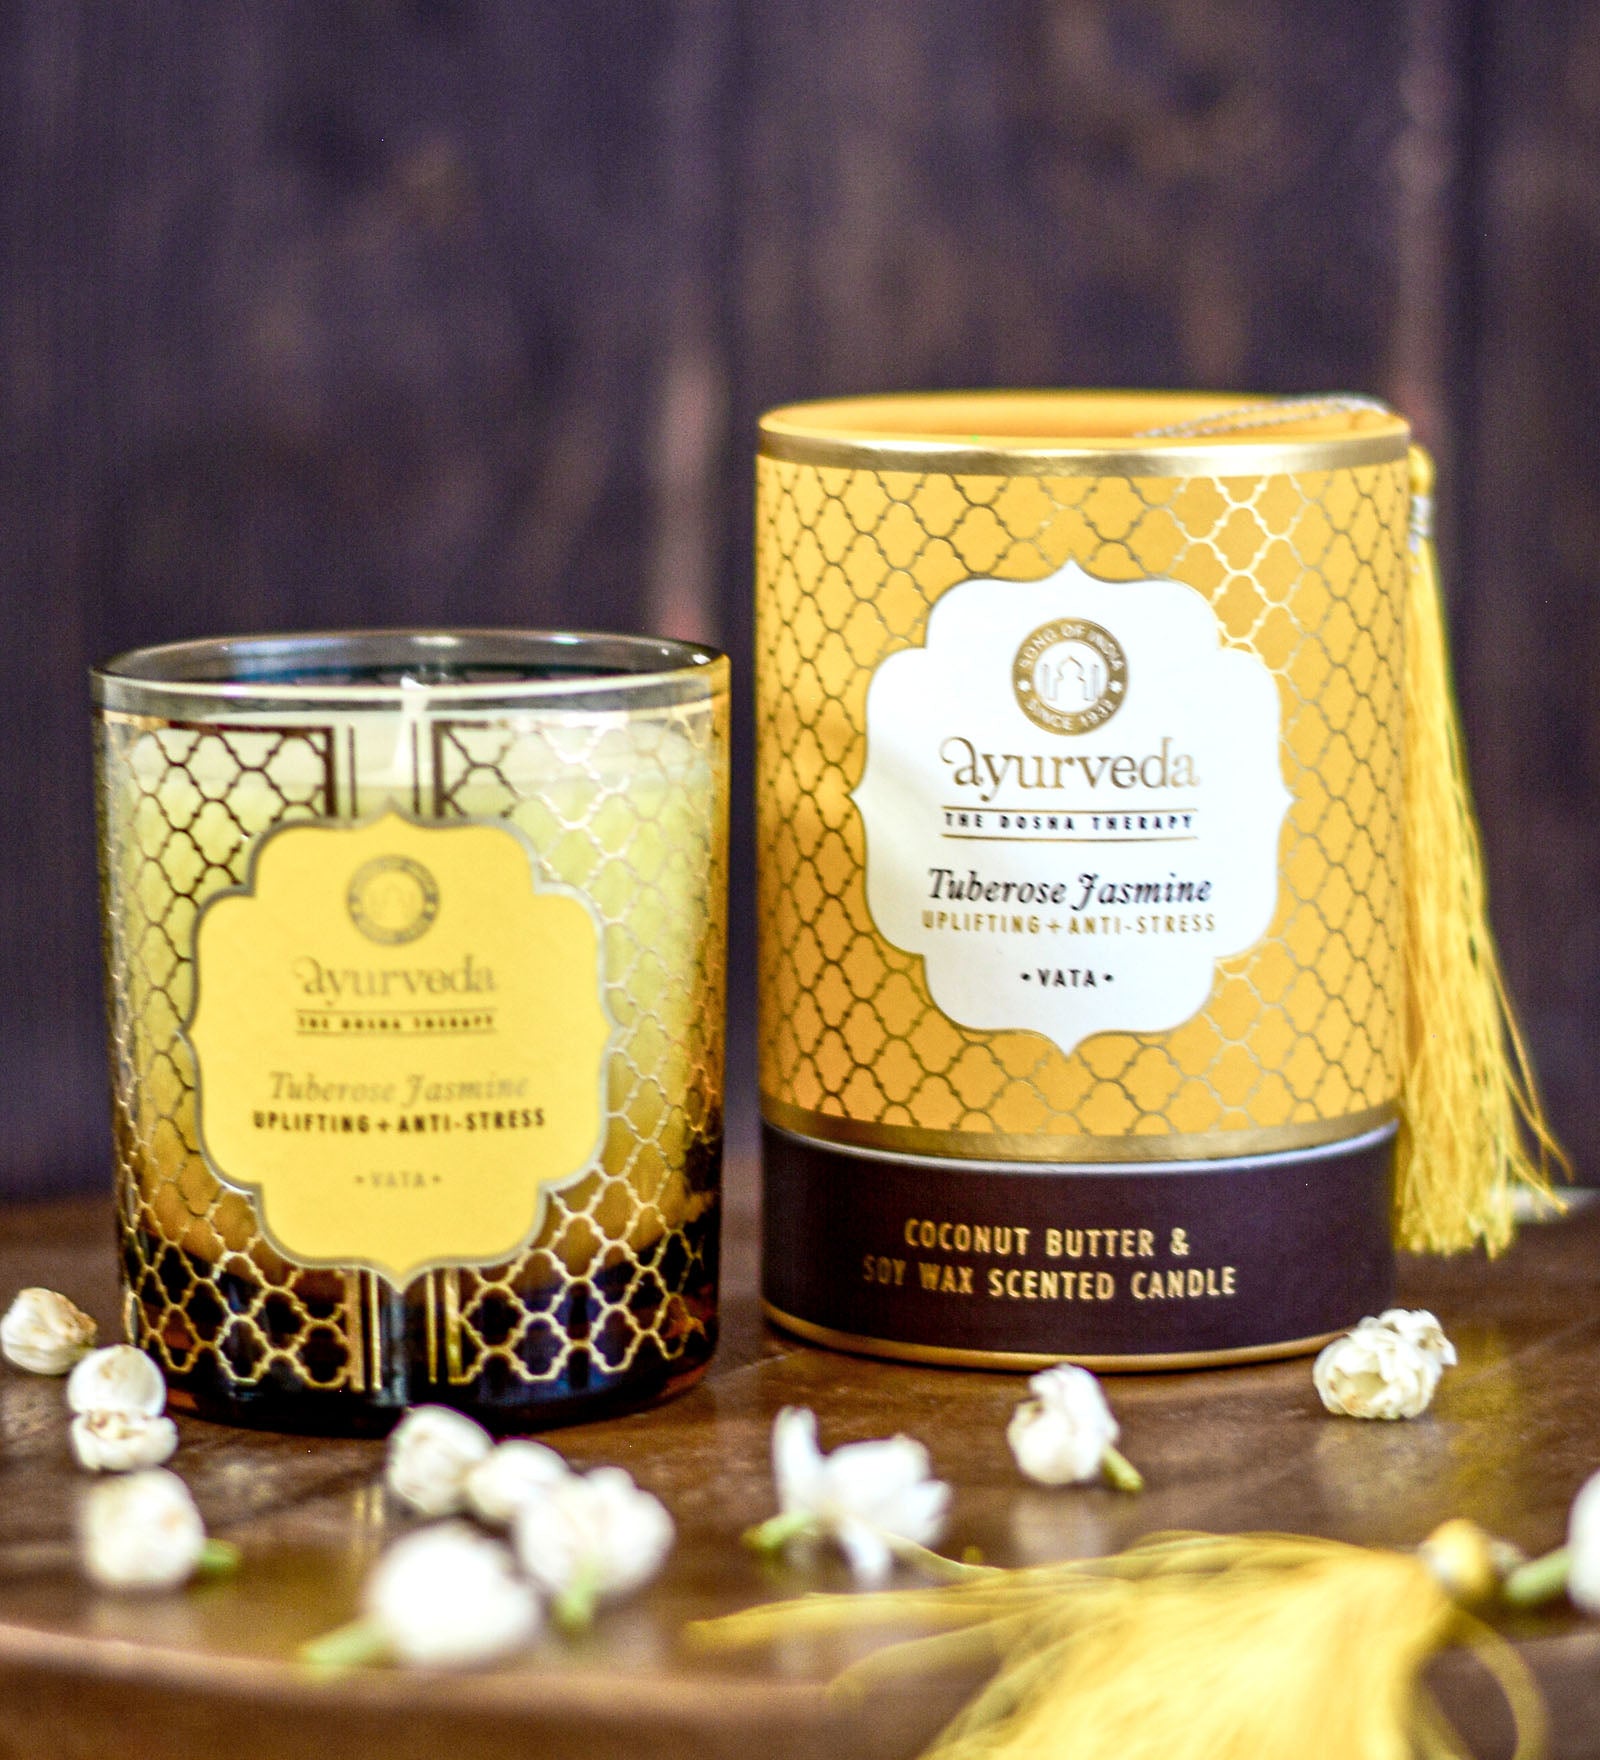 Song of India 200 g. Tuberose Jasmine Luxurious Veda Scented Candle in Brown Colored Glass Jar